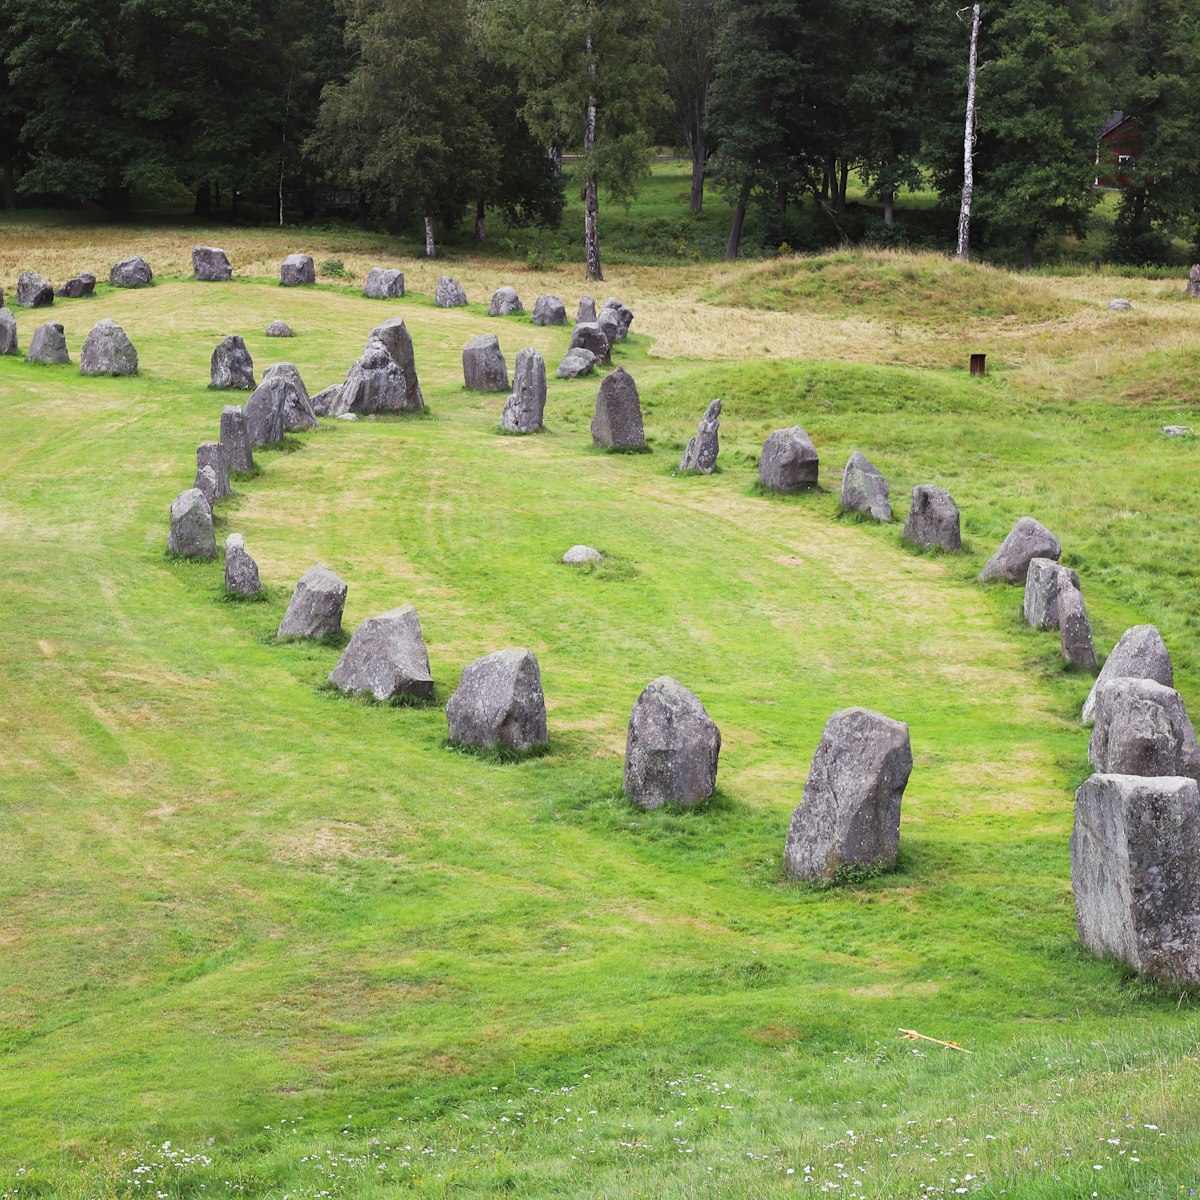 Two of the stone ships located at Anundshog in Sweden.
